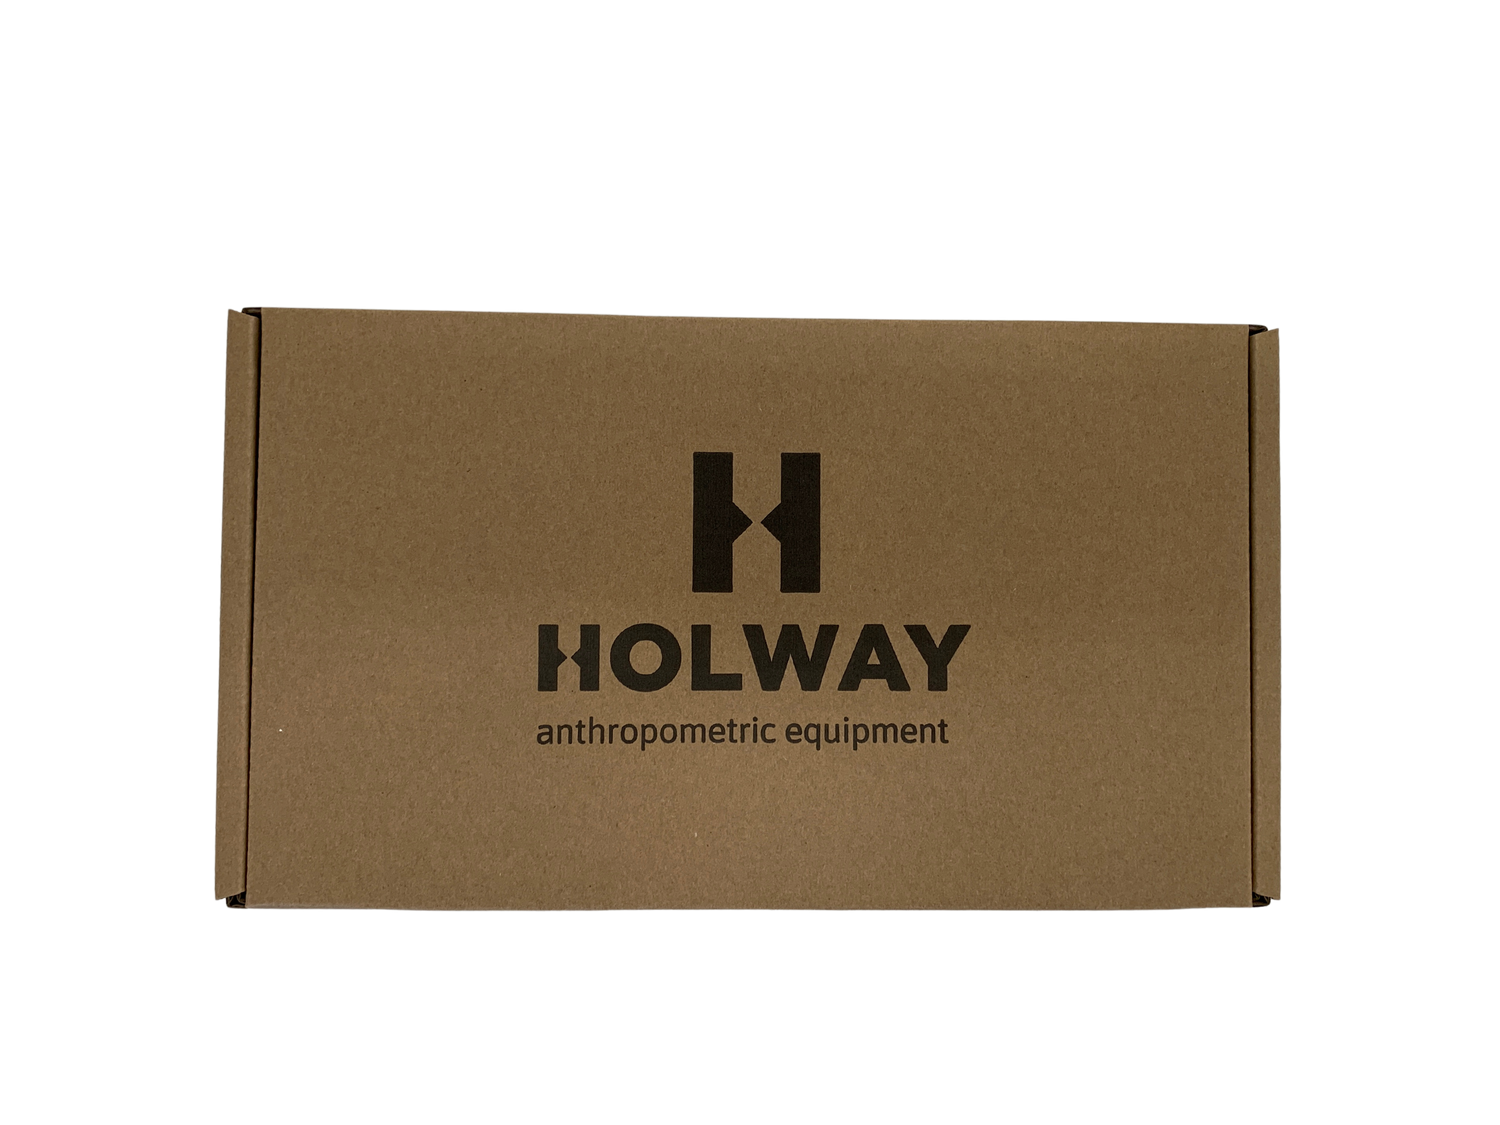 Holway Professional Skinfold Caliper